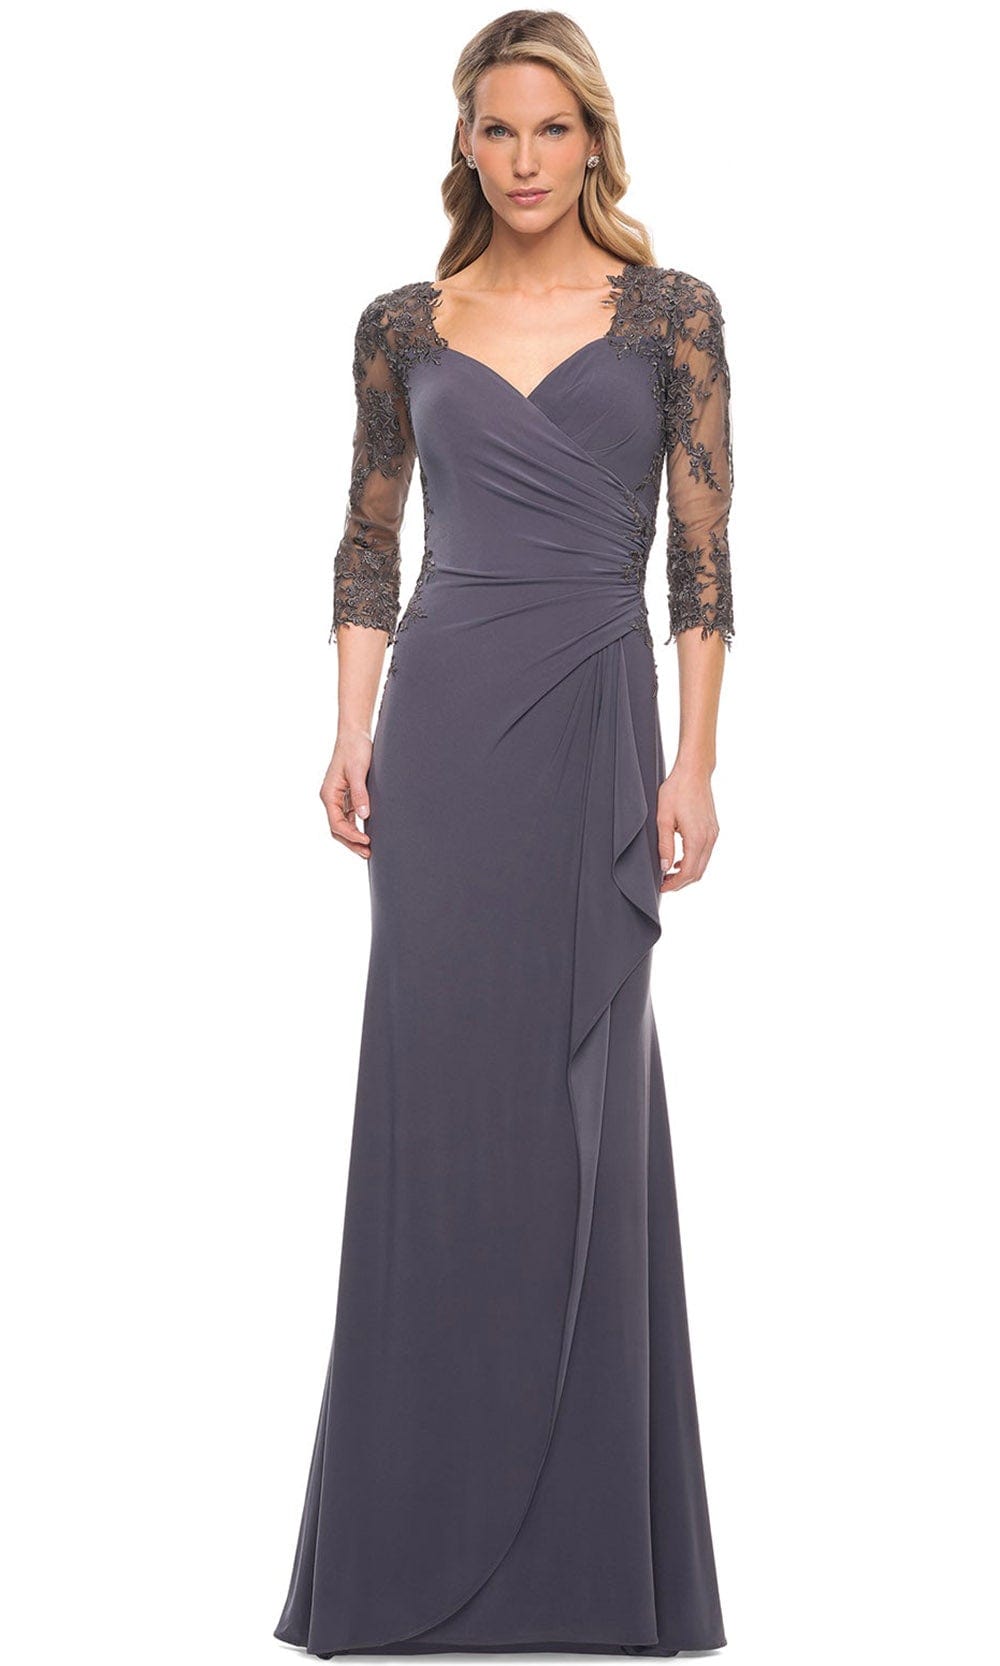 Image of La Femme 30384 - Lace Covered Sleeves Net Jersey Gown